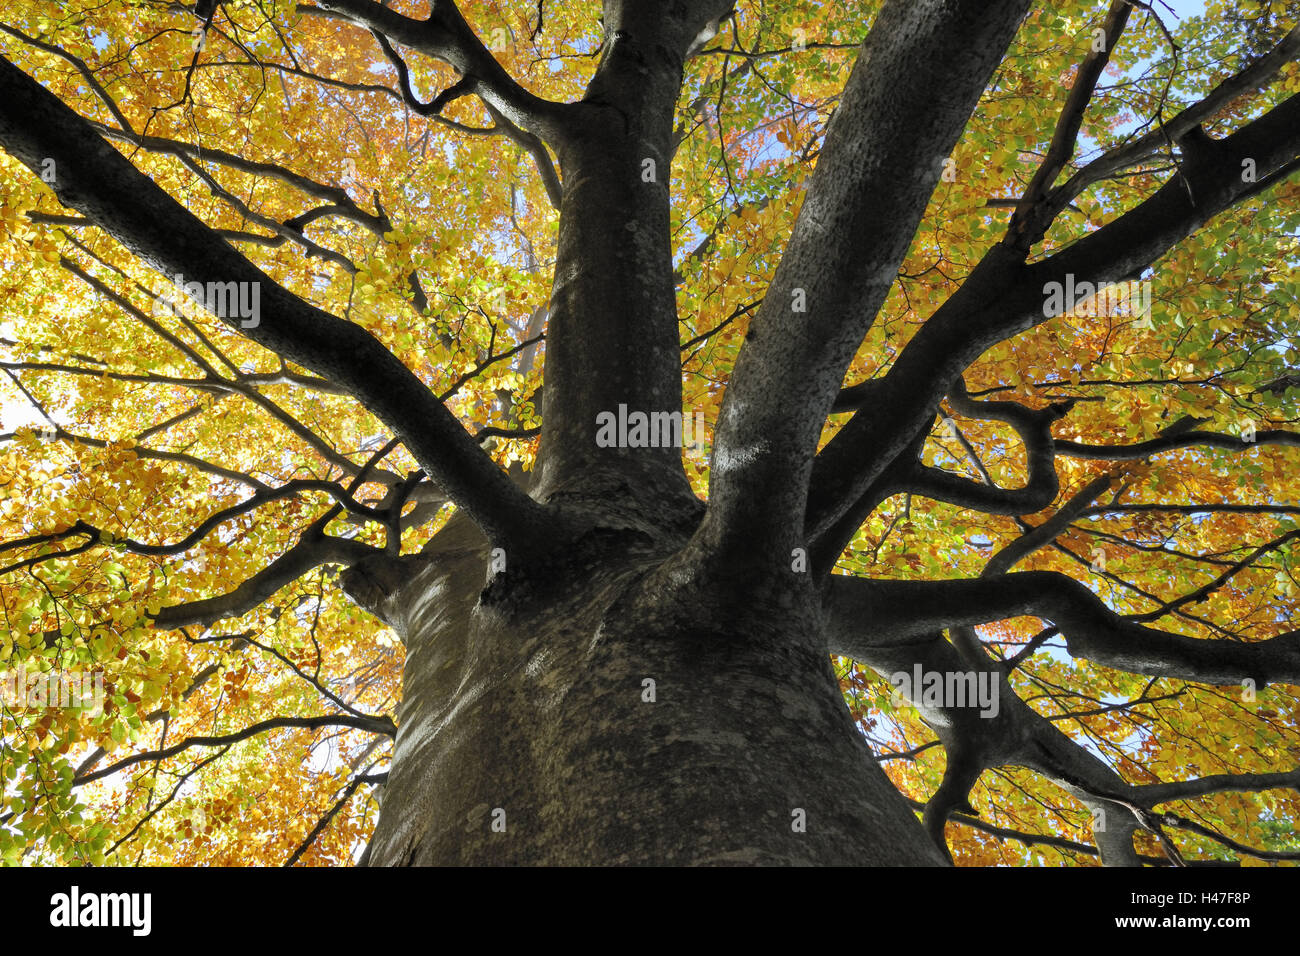 Copper beech, Fagus sylvatica, outside, leaves, nobody, tree, book, beechwood, wood, trunk, branches, autumn, foliage, autumn foliage, broad-leaved tree, Stock Photo